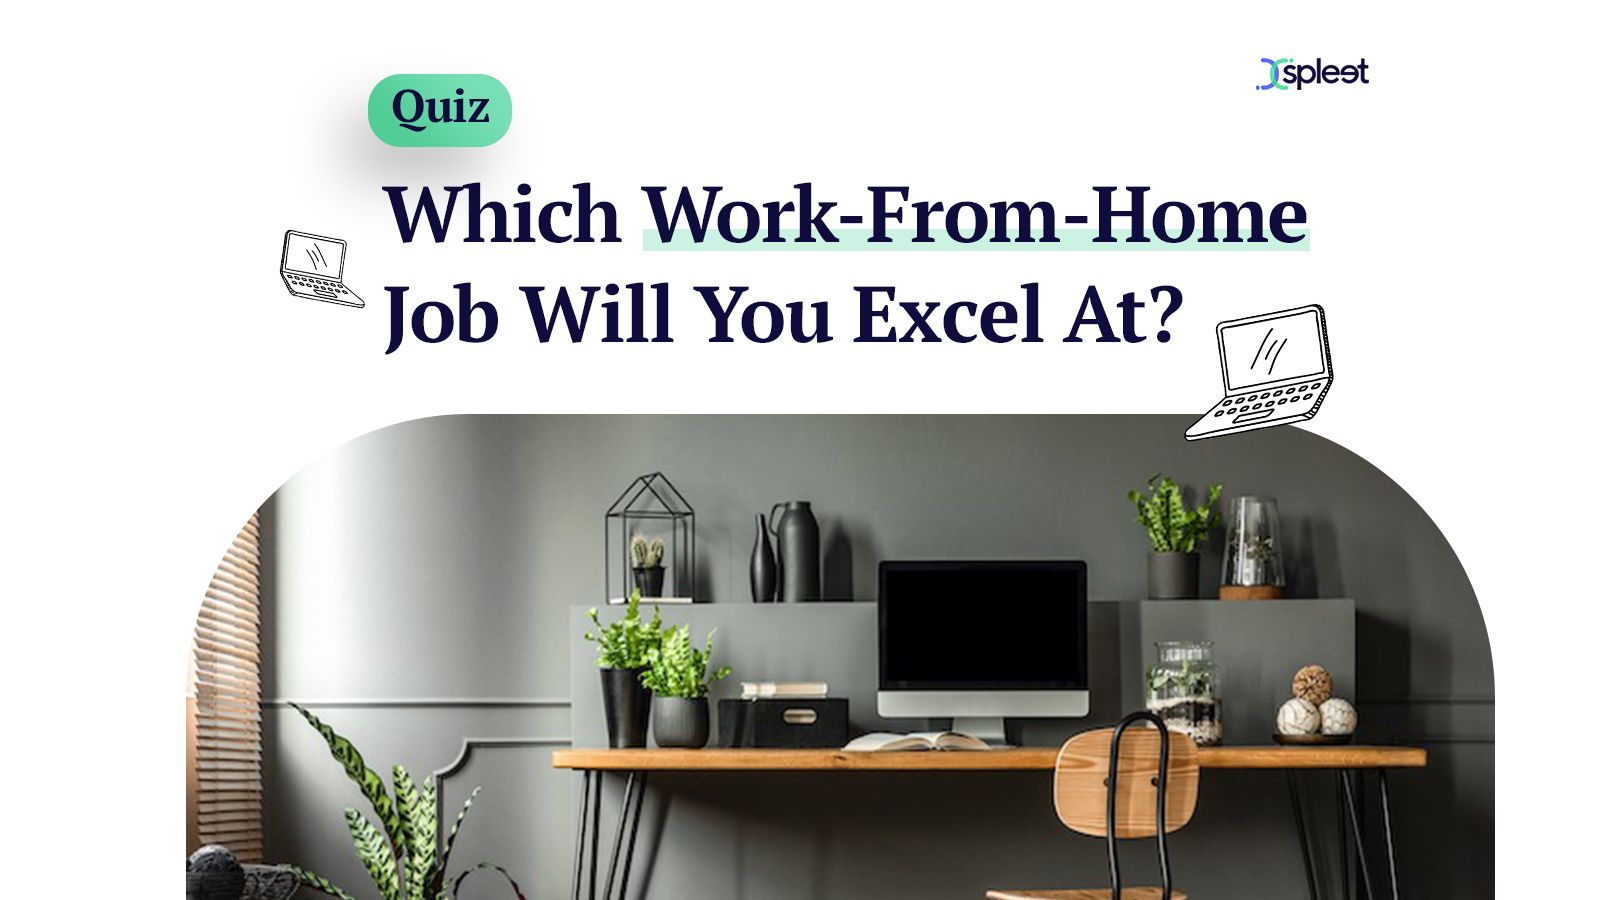 Quiz: Which work-from-home job will you excel at?